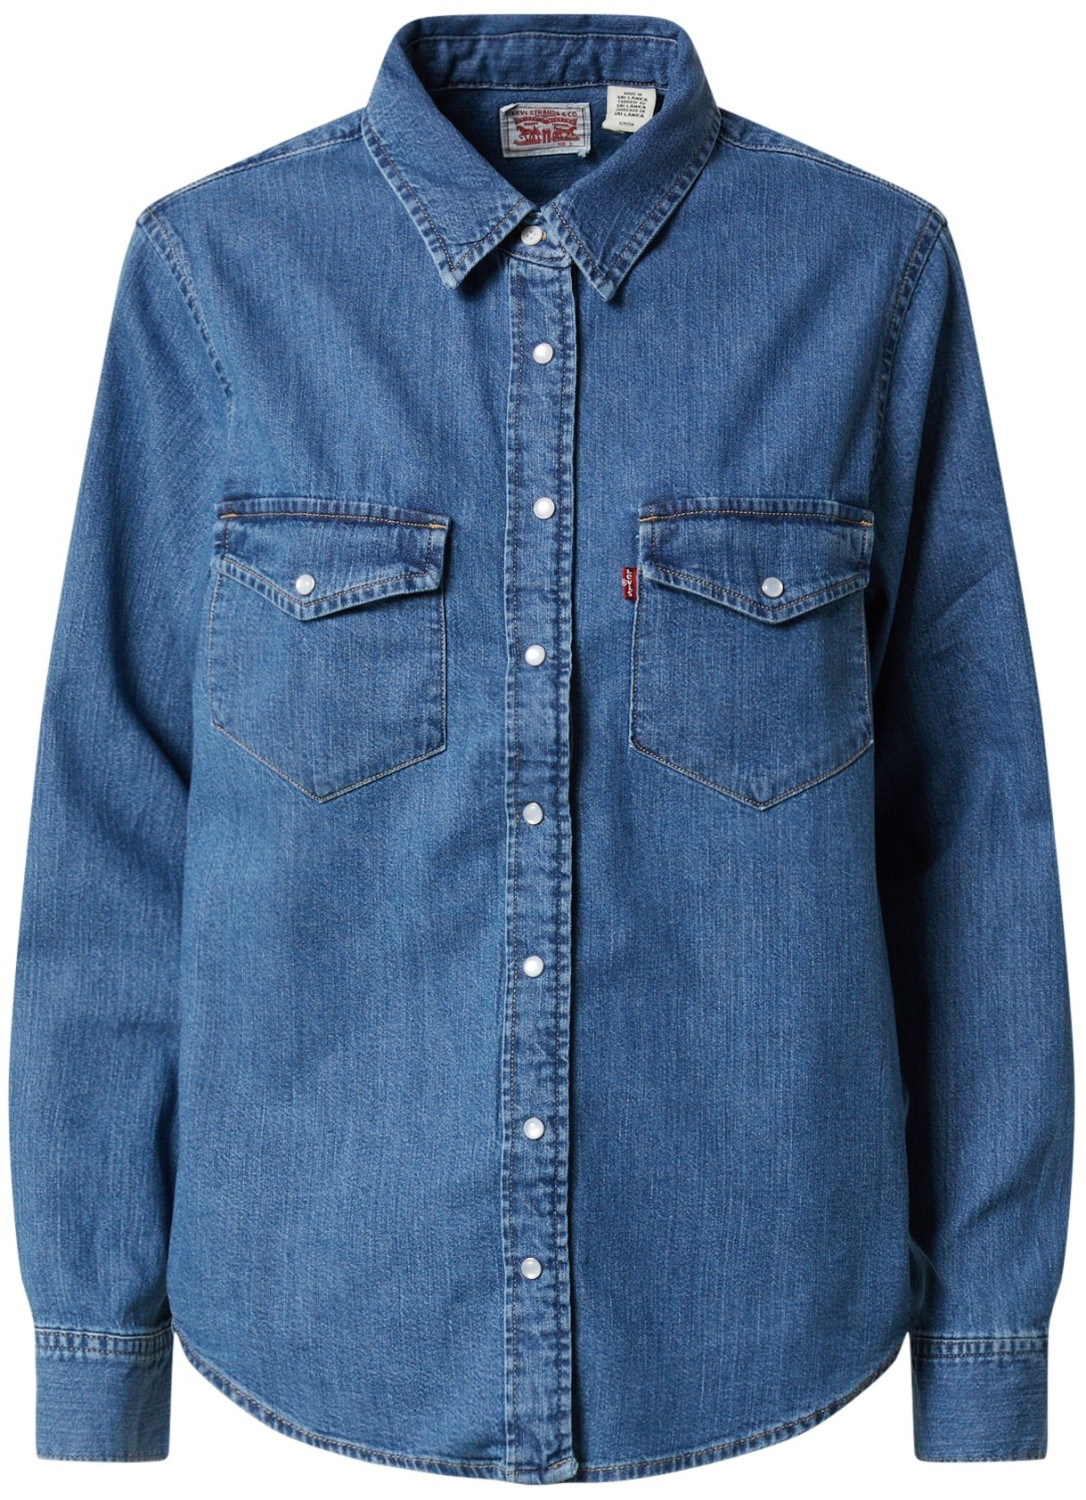 Buy Levi\'s Essential Western Shirt from £36.99 (Today) – Best Deals on